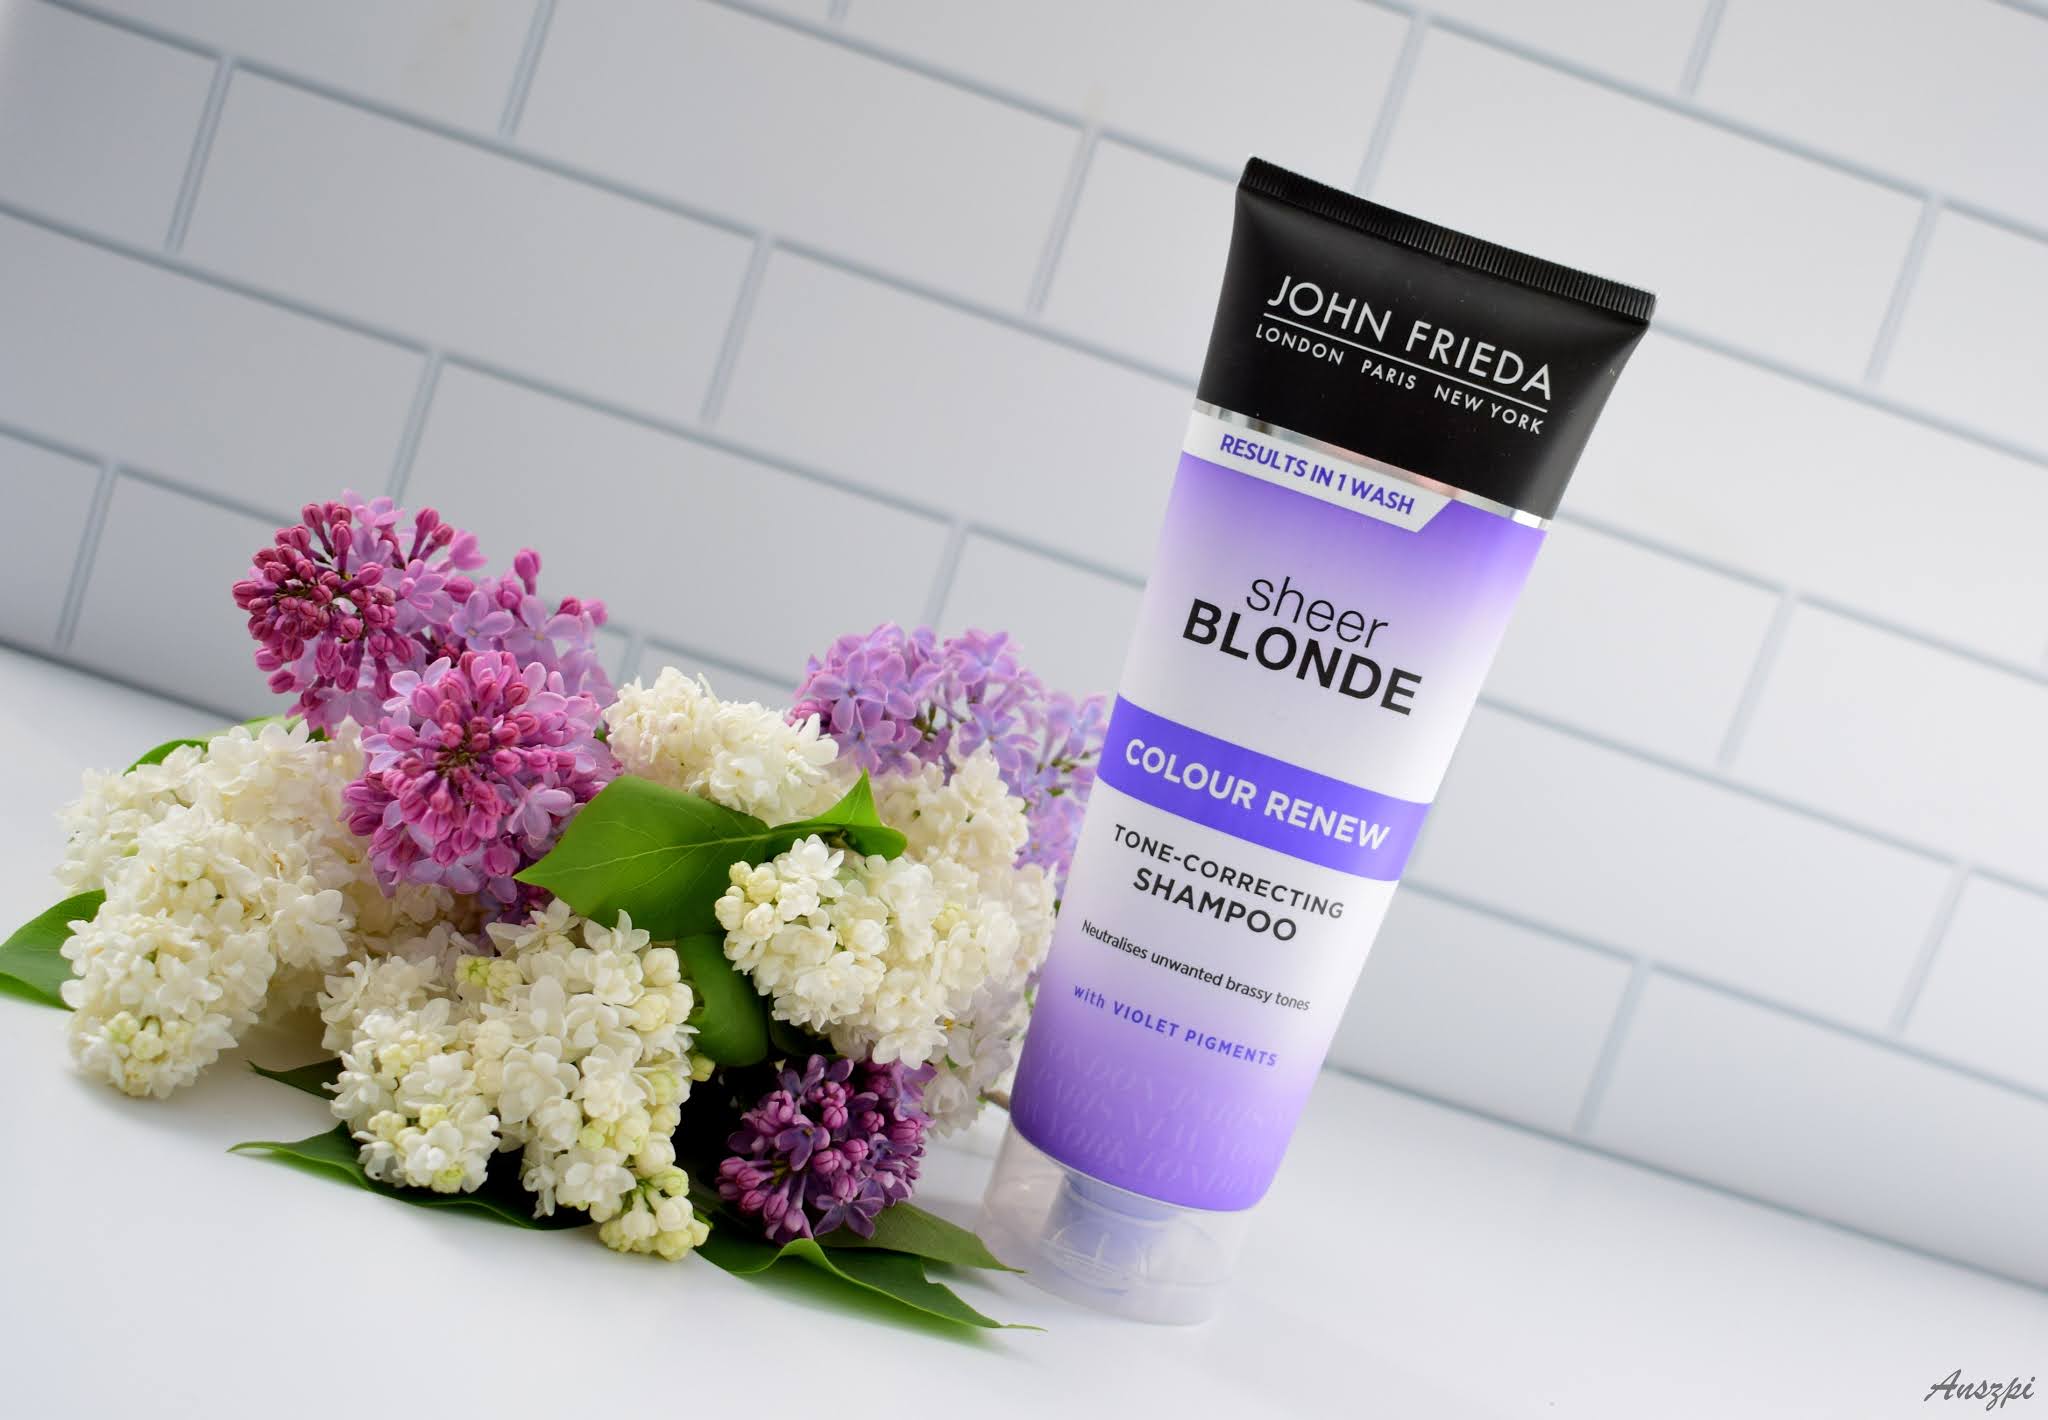 6. John Frieda Sheer Blonde Colour Renew Purple Shampoo, 8.45 Ounce Daily Color Protecting Shampoo, with Lavender Extract - wide 11